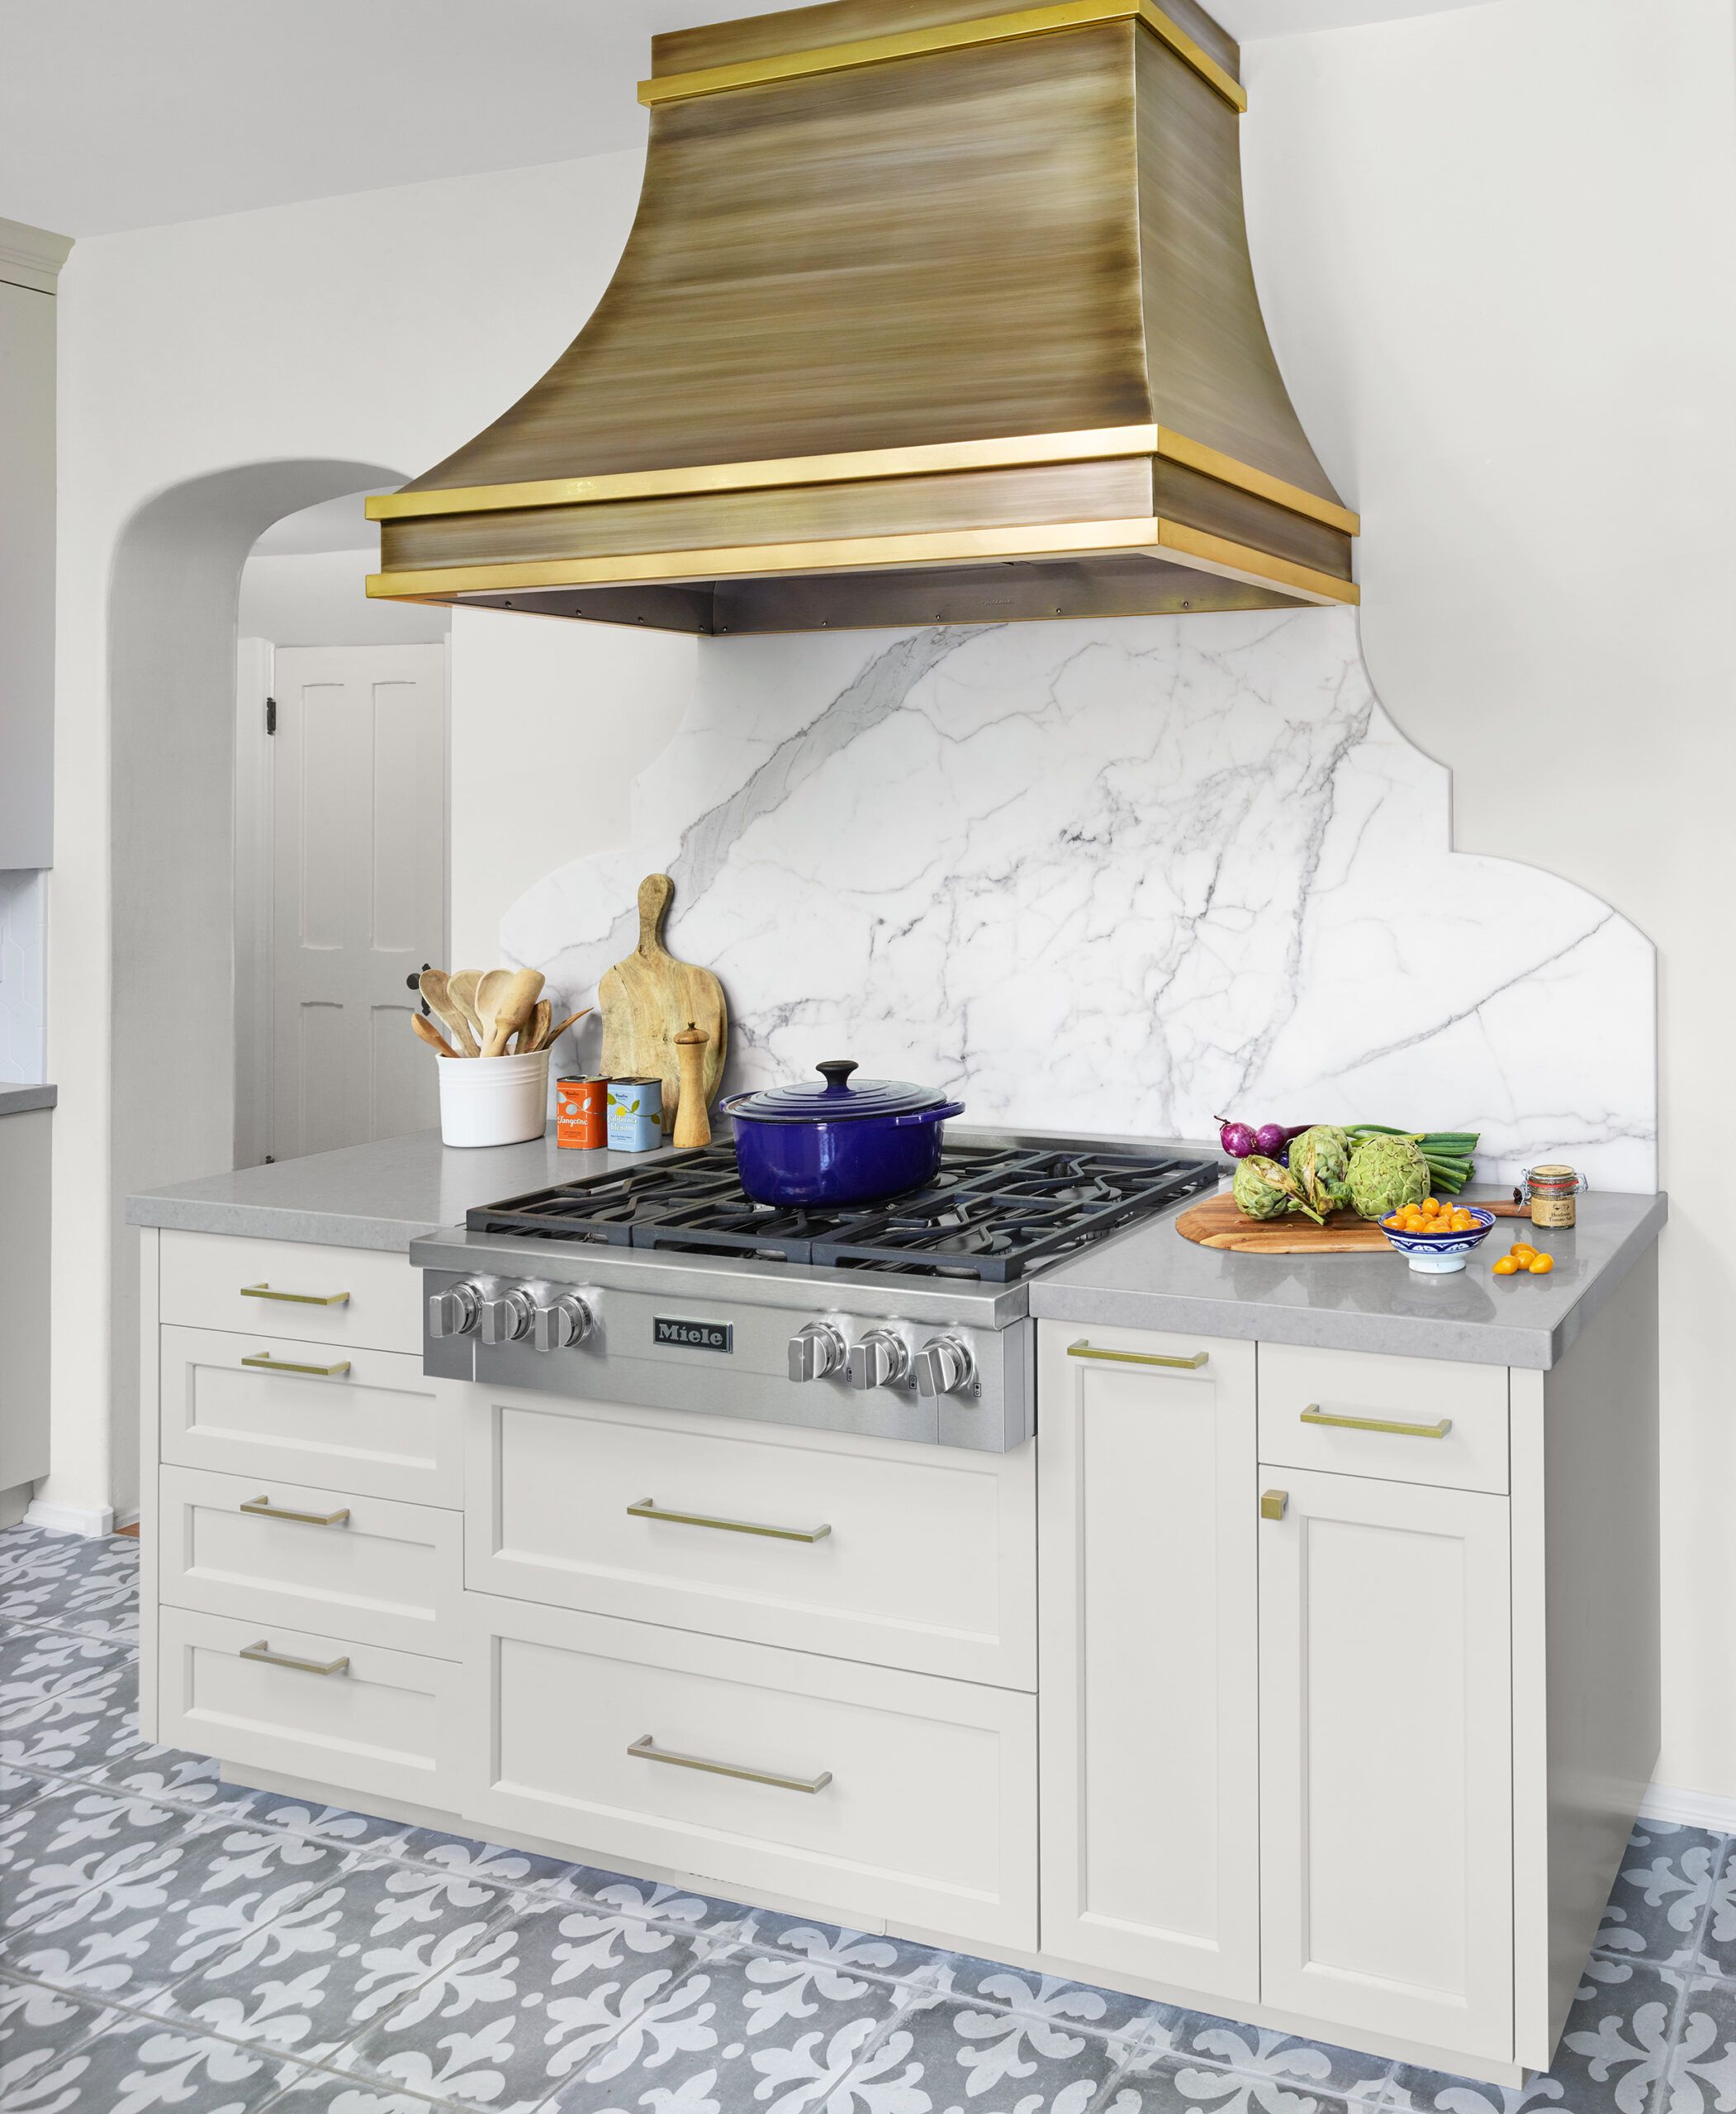 How A Combi Oven Expands Small Kitchens